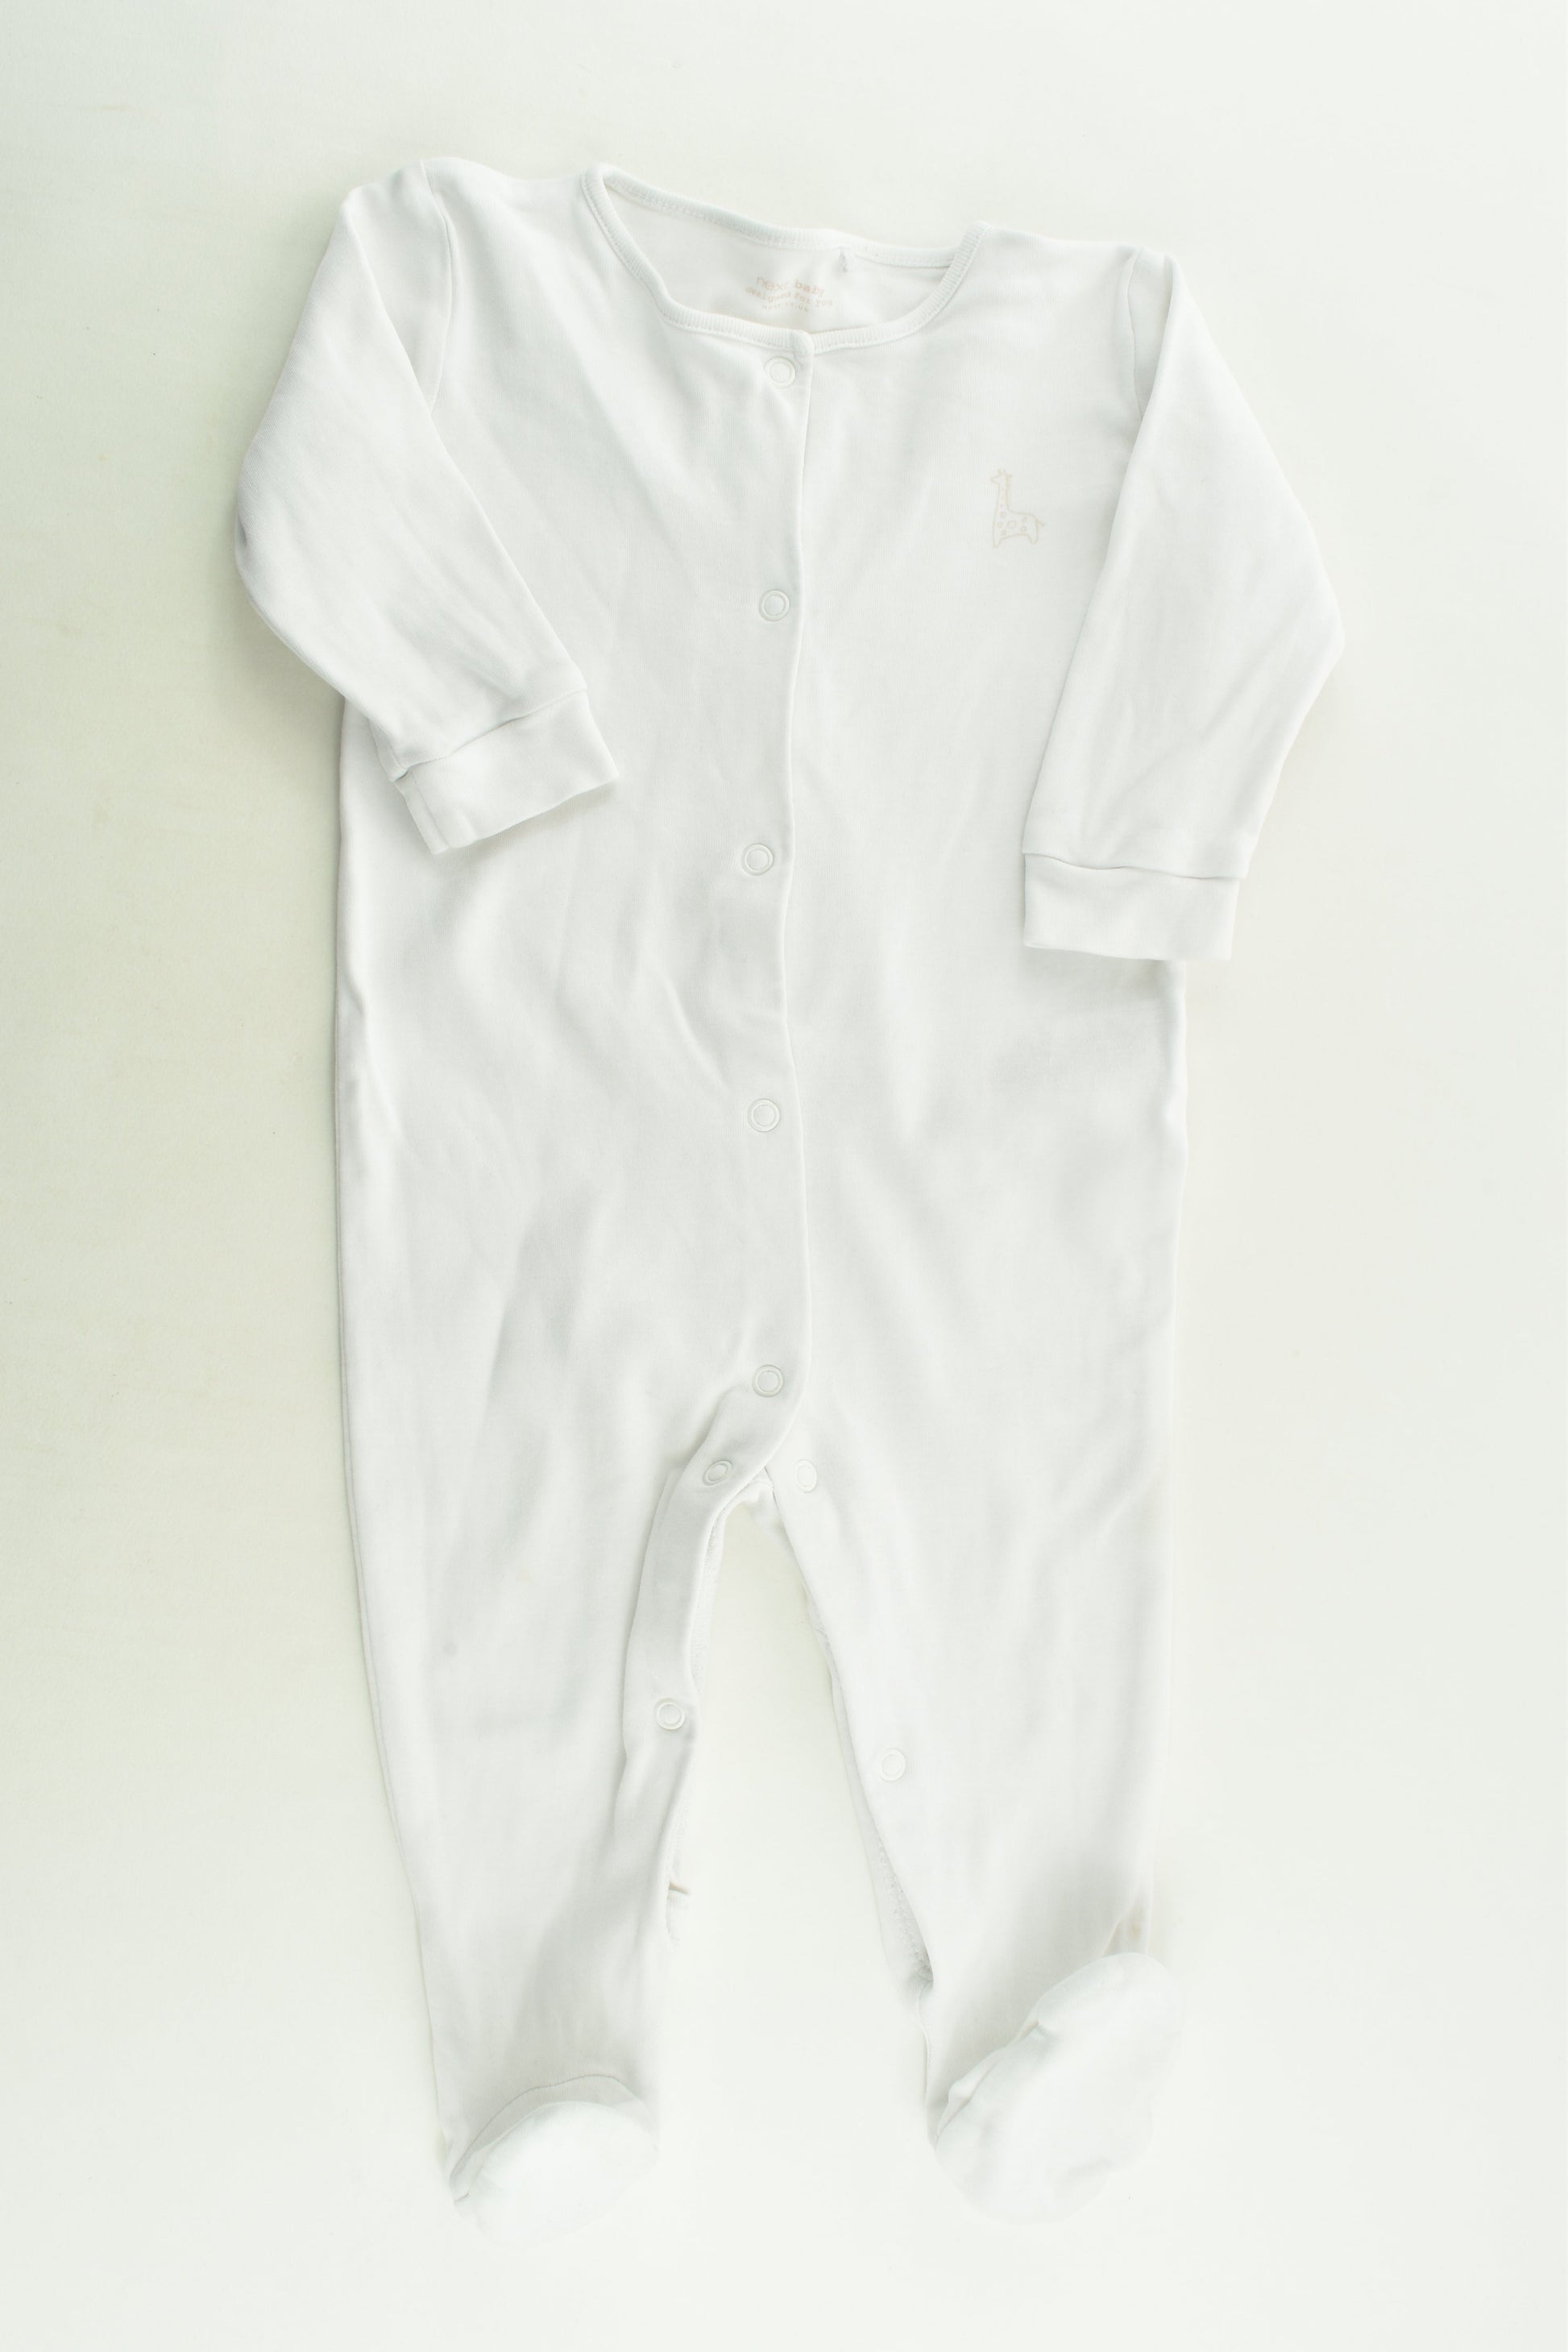 Next Size 0 (6-9 months) Footed Romper